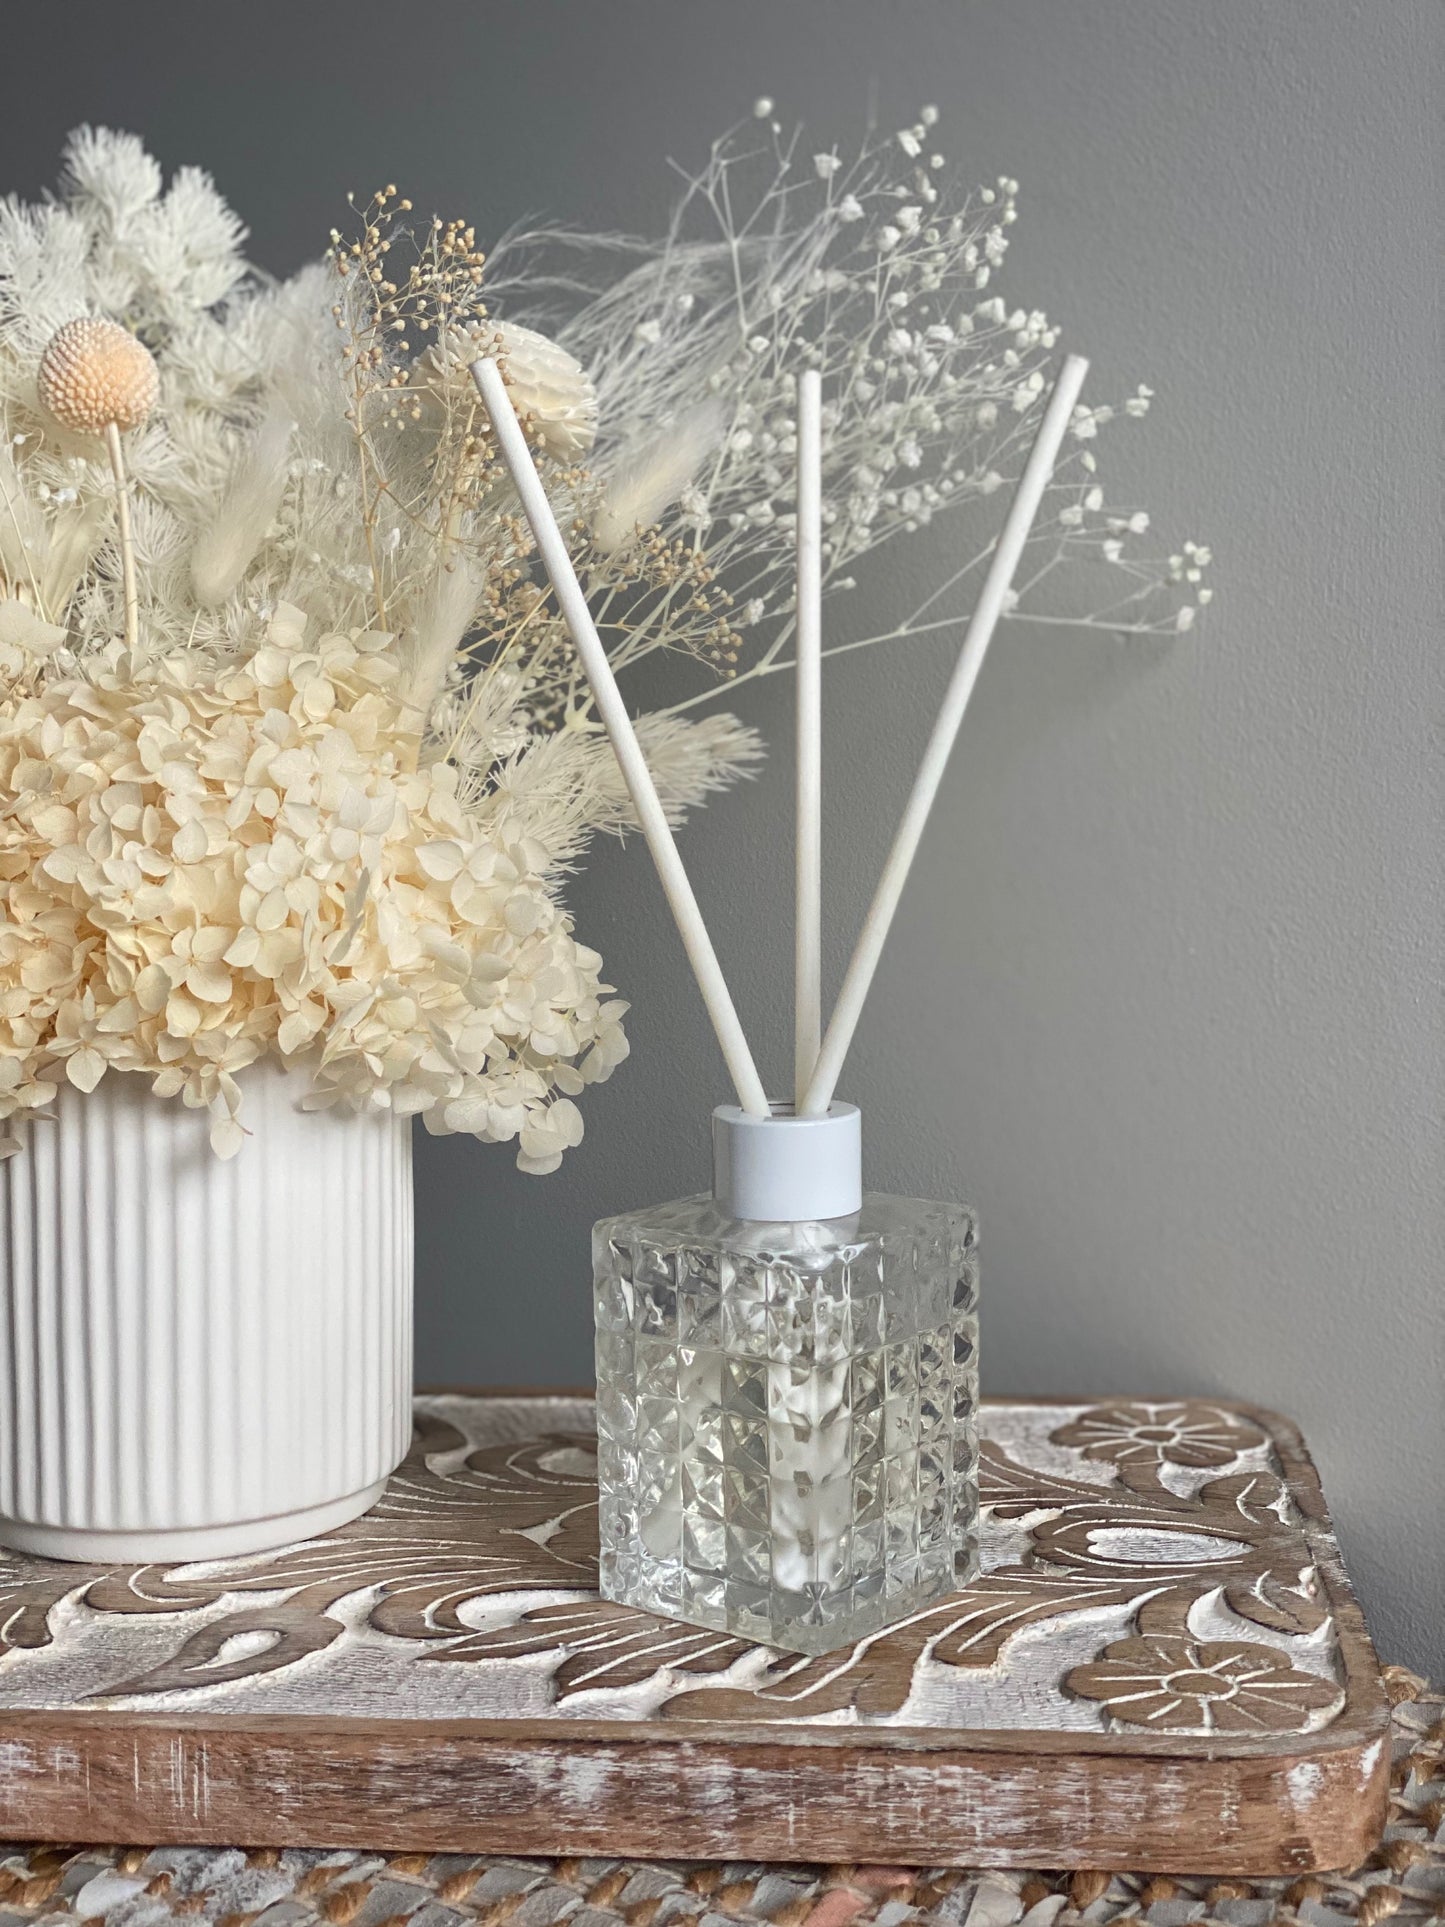 Our diffusers are the perfect way to add long lasting fragrance to any room. They are handmade in Sydney and will last between 8-10 months.